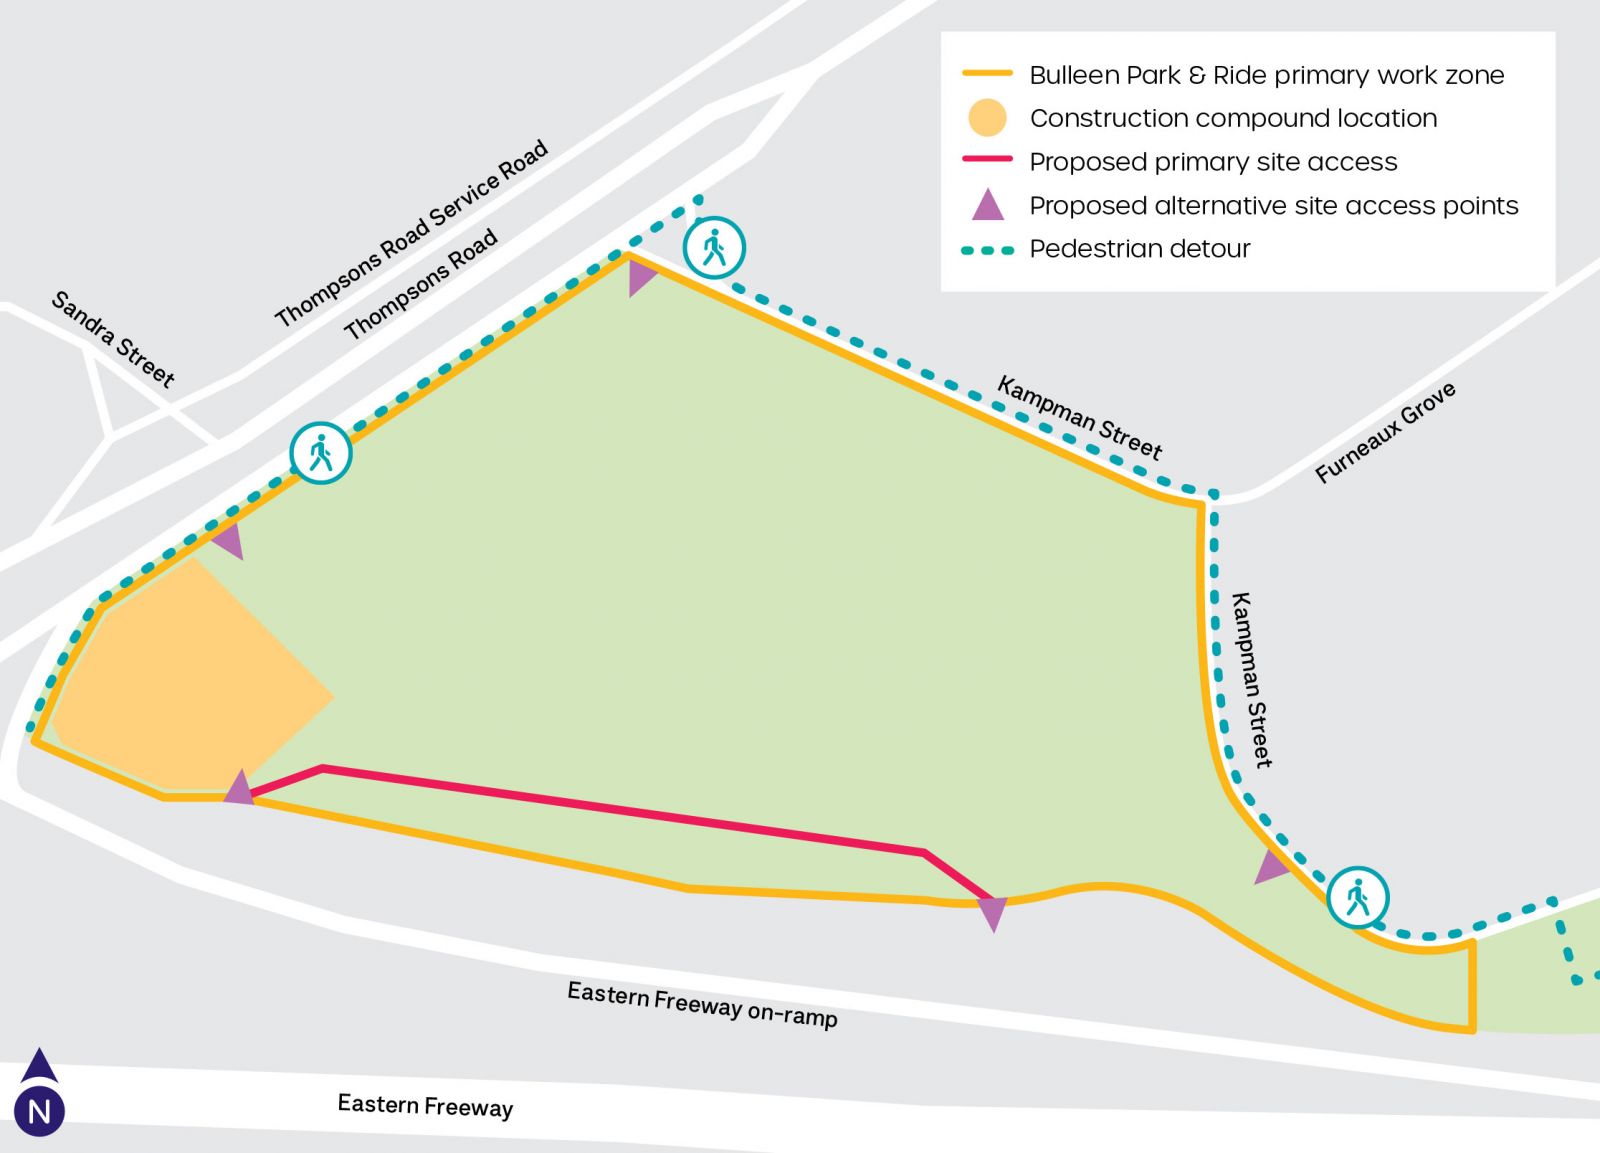 A map showing the Bulleen Park and Ride site plan, highlighting the primary work zone, construction compound location, proposed primary site access, proposed alternative site access points and pedestrian detour.